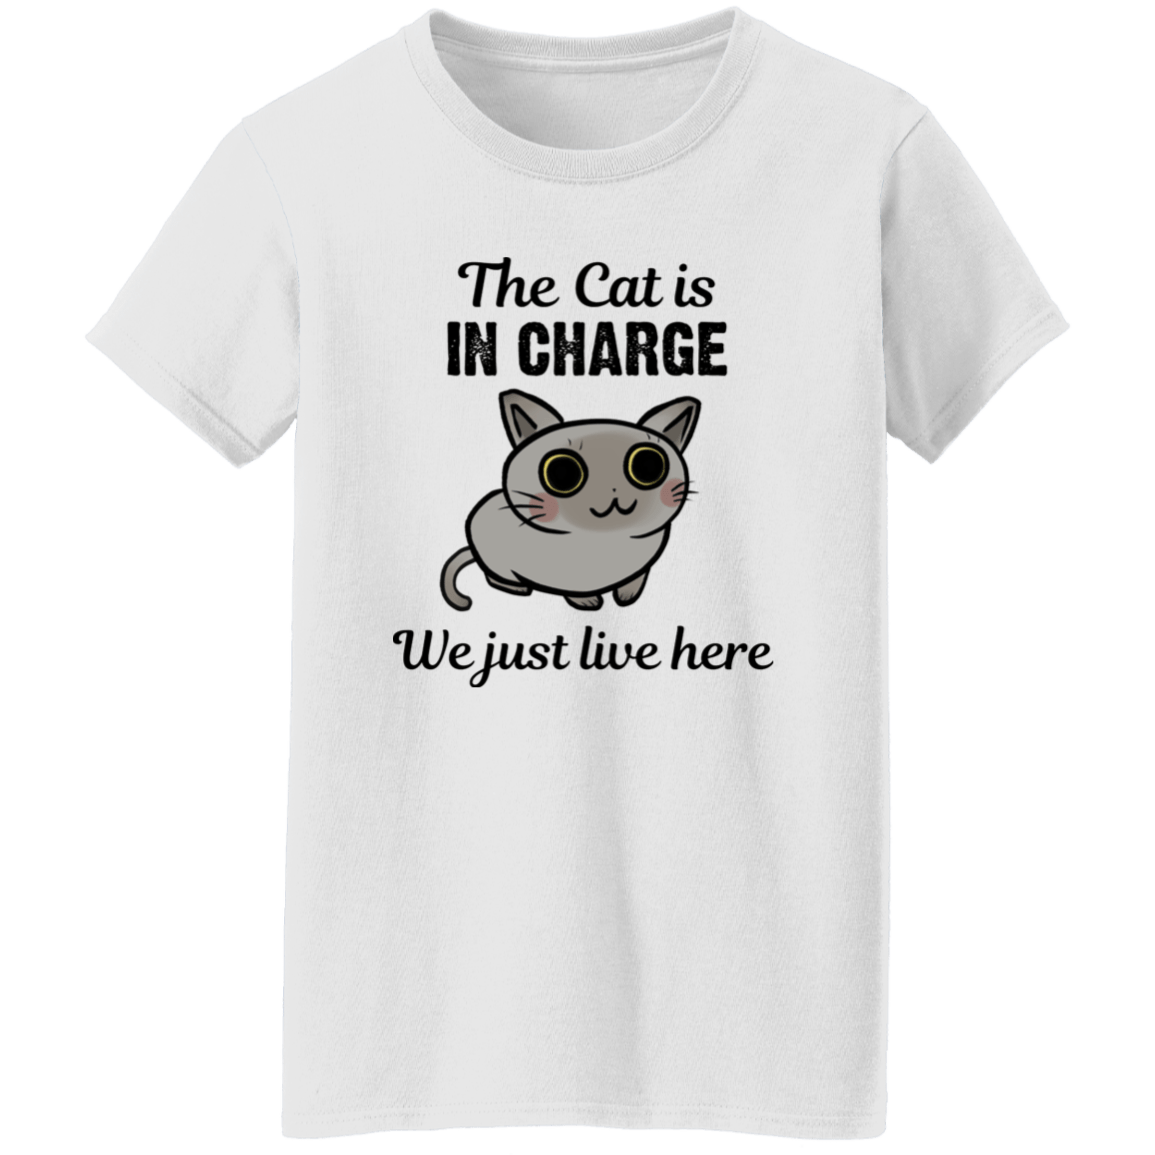 The Cat is in Charge - Ladies T-Shirt.